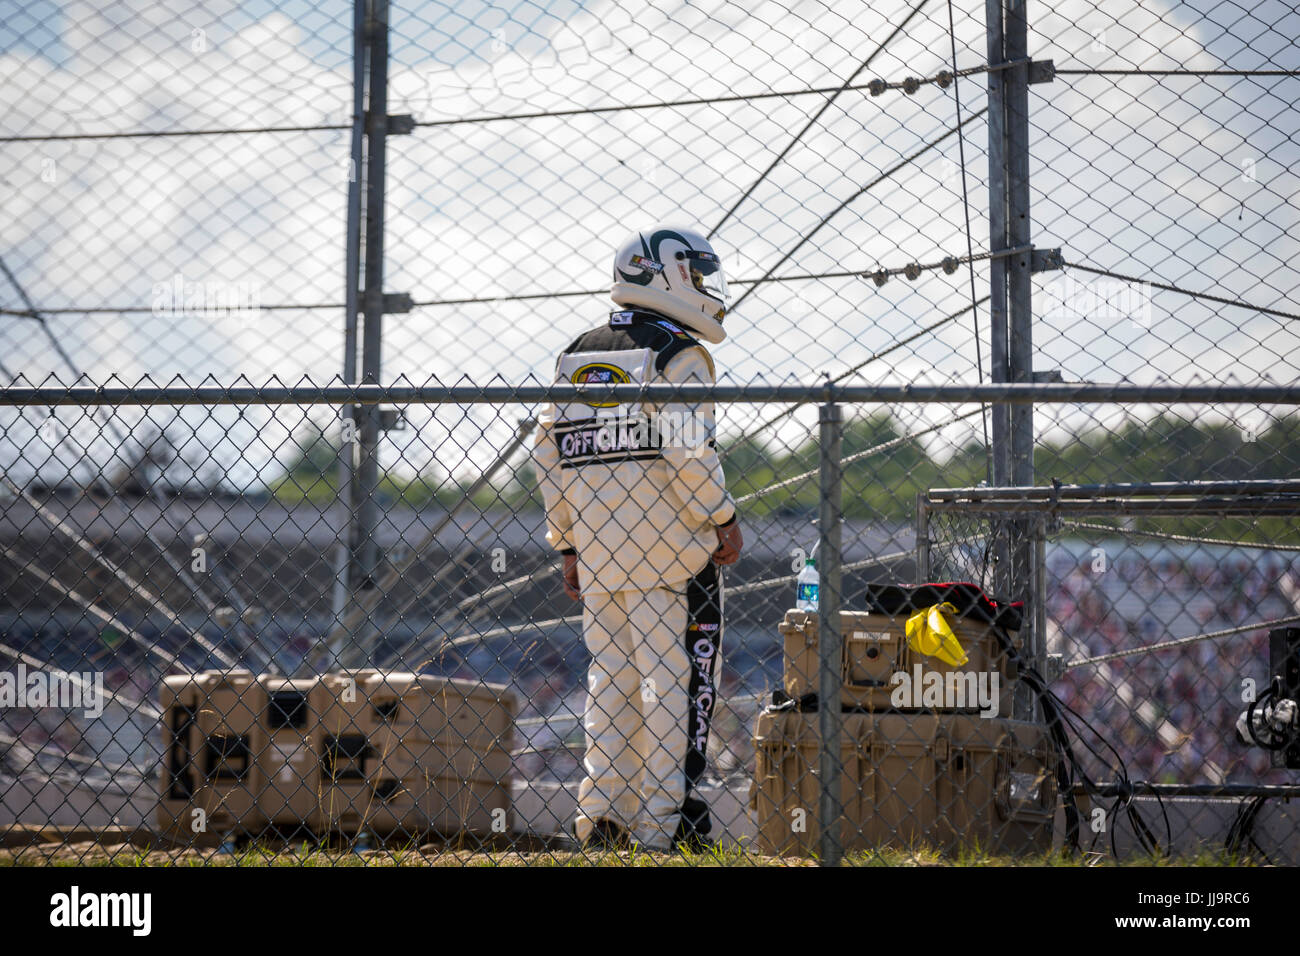 A race official watches the NH 301 NASCAR Sprint Cup race from outside the fence at the New Hampshire Motor Speedway. Stock Photo